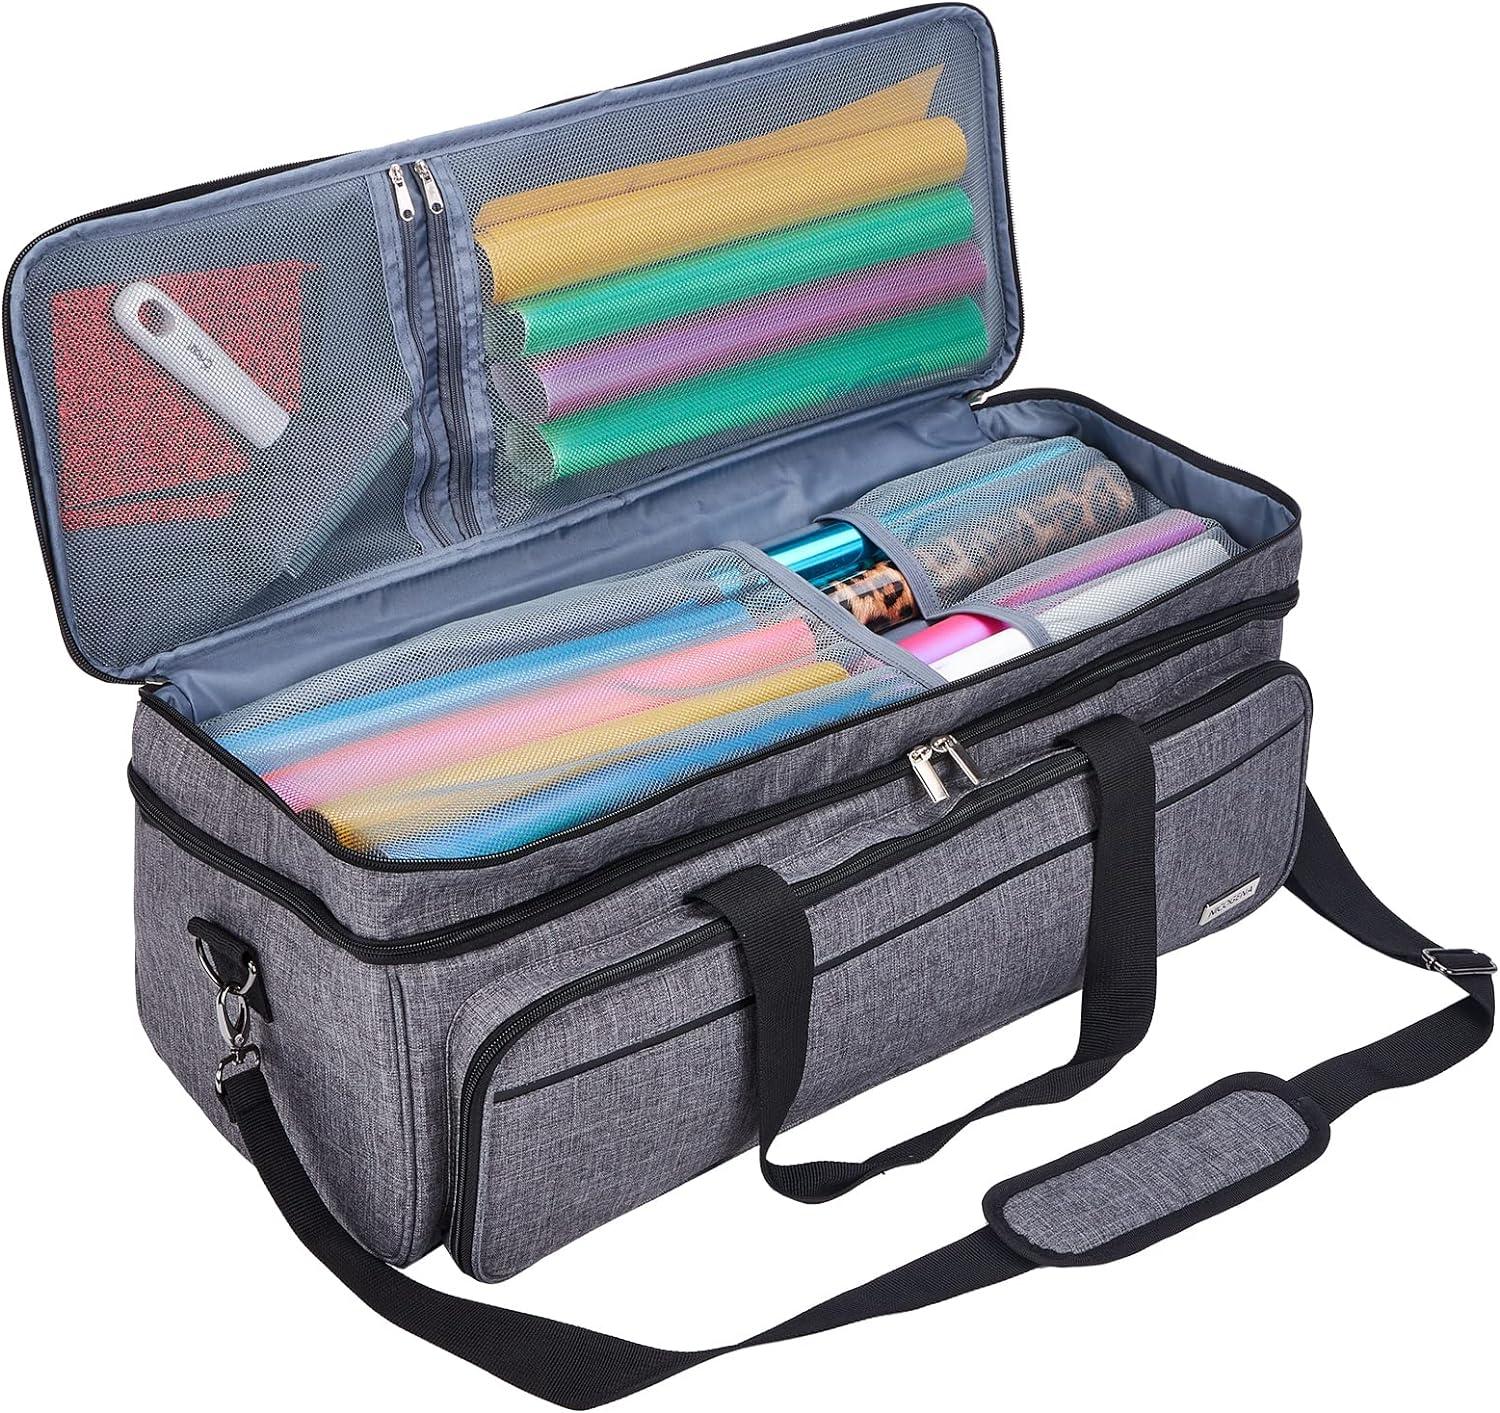 Carrying Case for Cricut Maker, Double-Layer Cricut Bag for Cricut Machine with Cover and Cutting Mat Pocket Compatible with Cricut Explore Air, Air 2